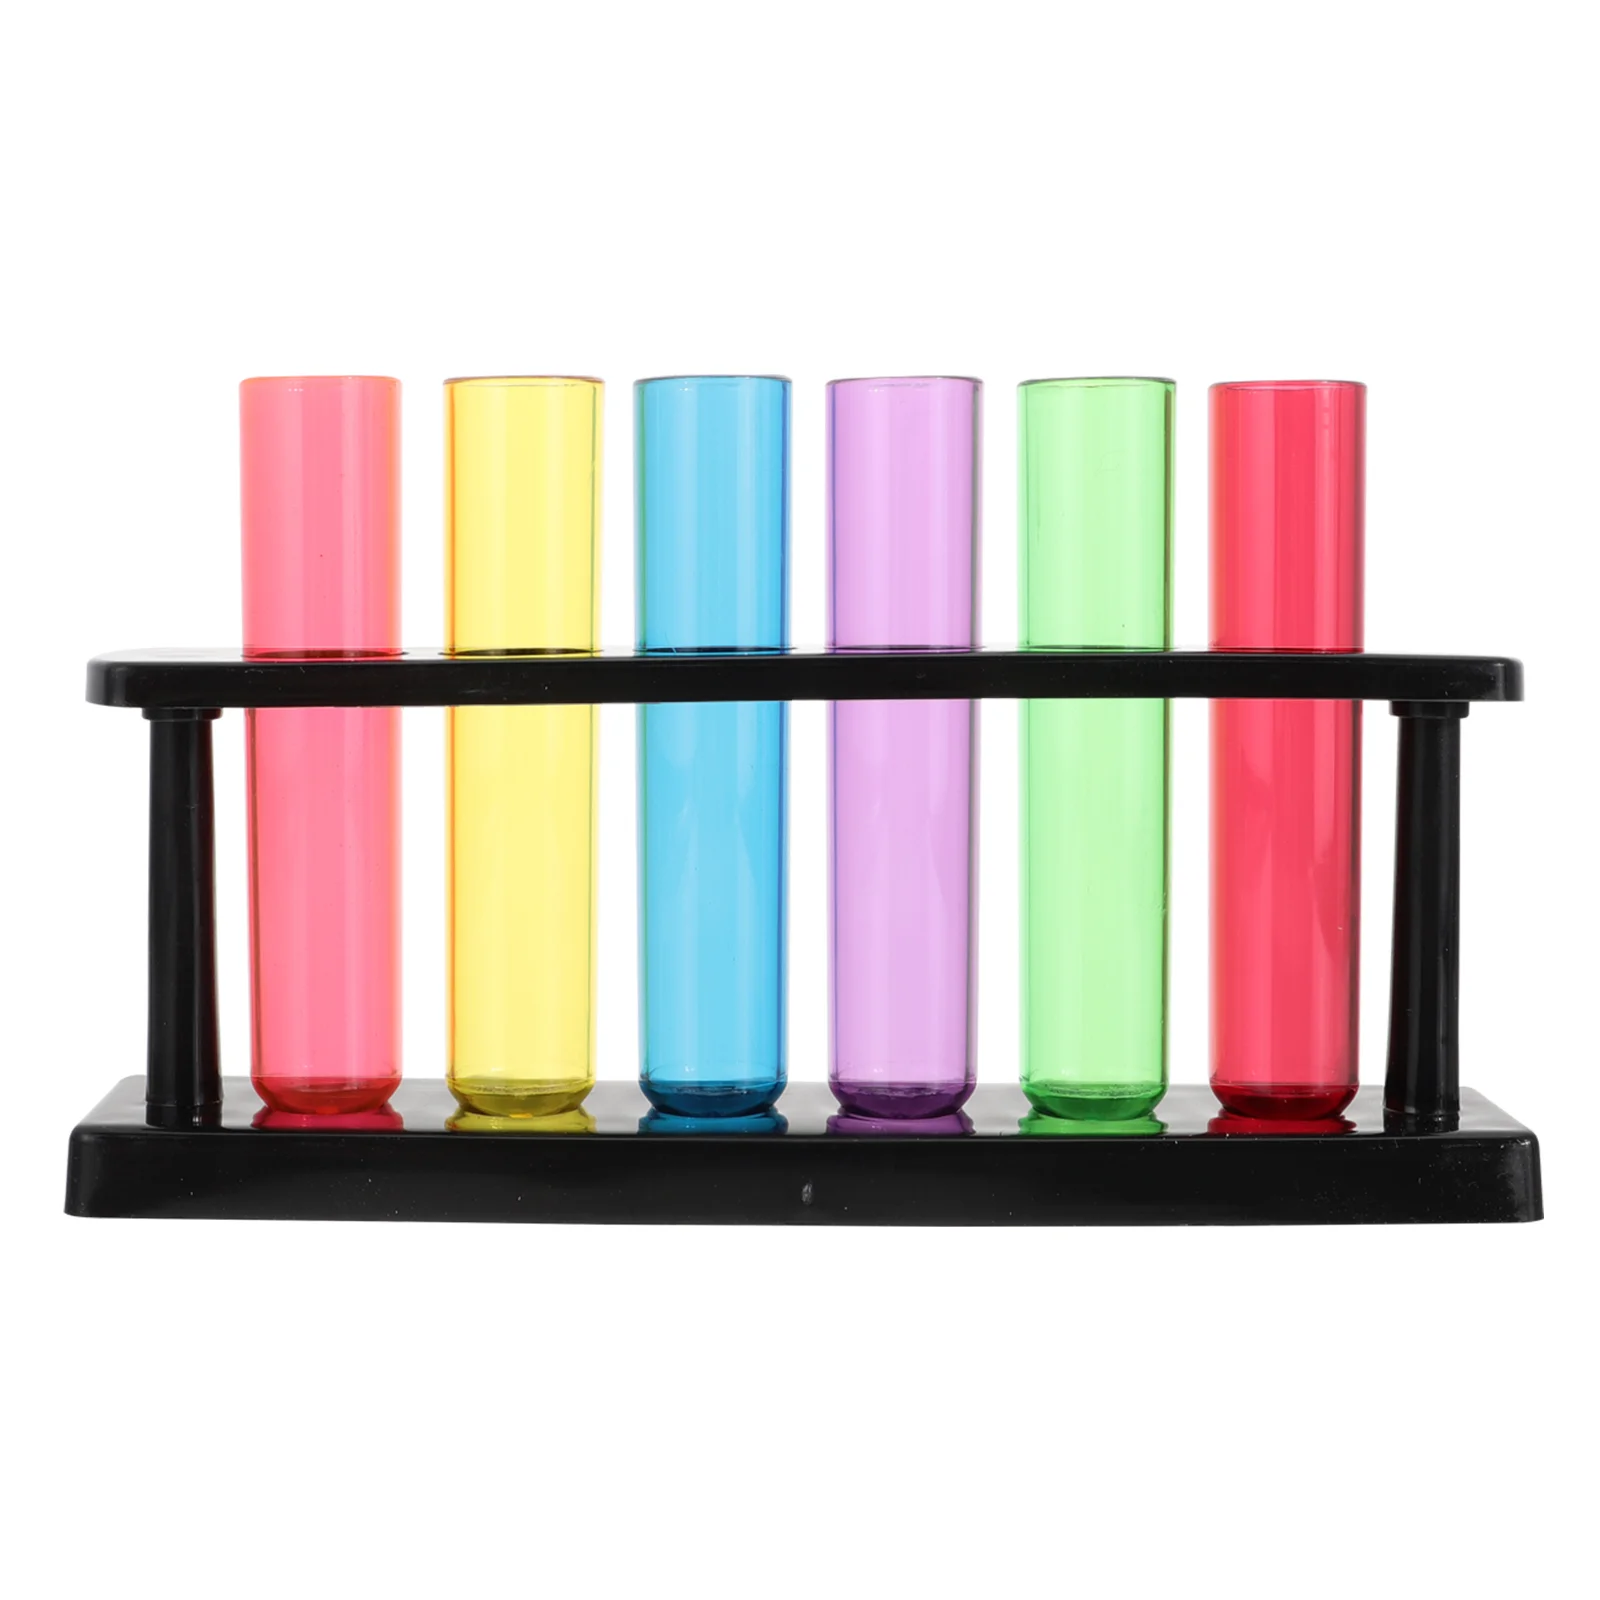 

Test Tube Glass Vial Plastic Storage Containers Tubes Children's Teaching Science Experiments Small Bottles For souvenirs Pipes